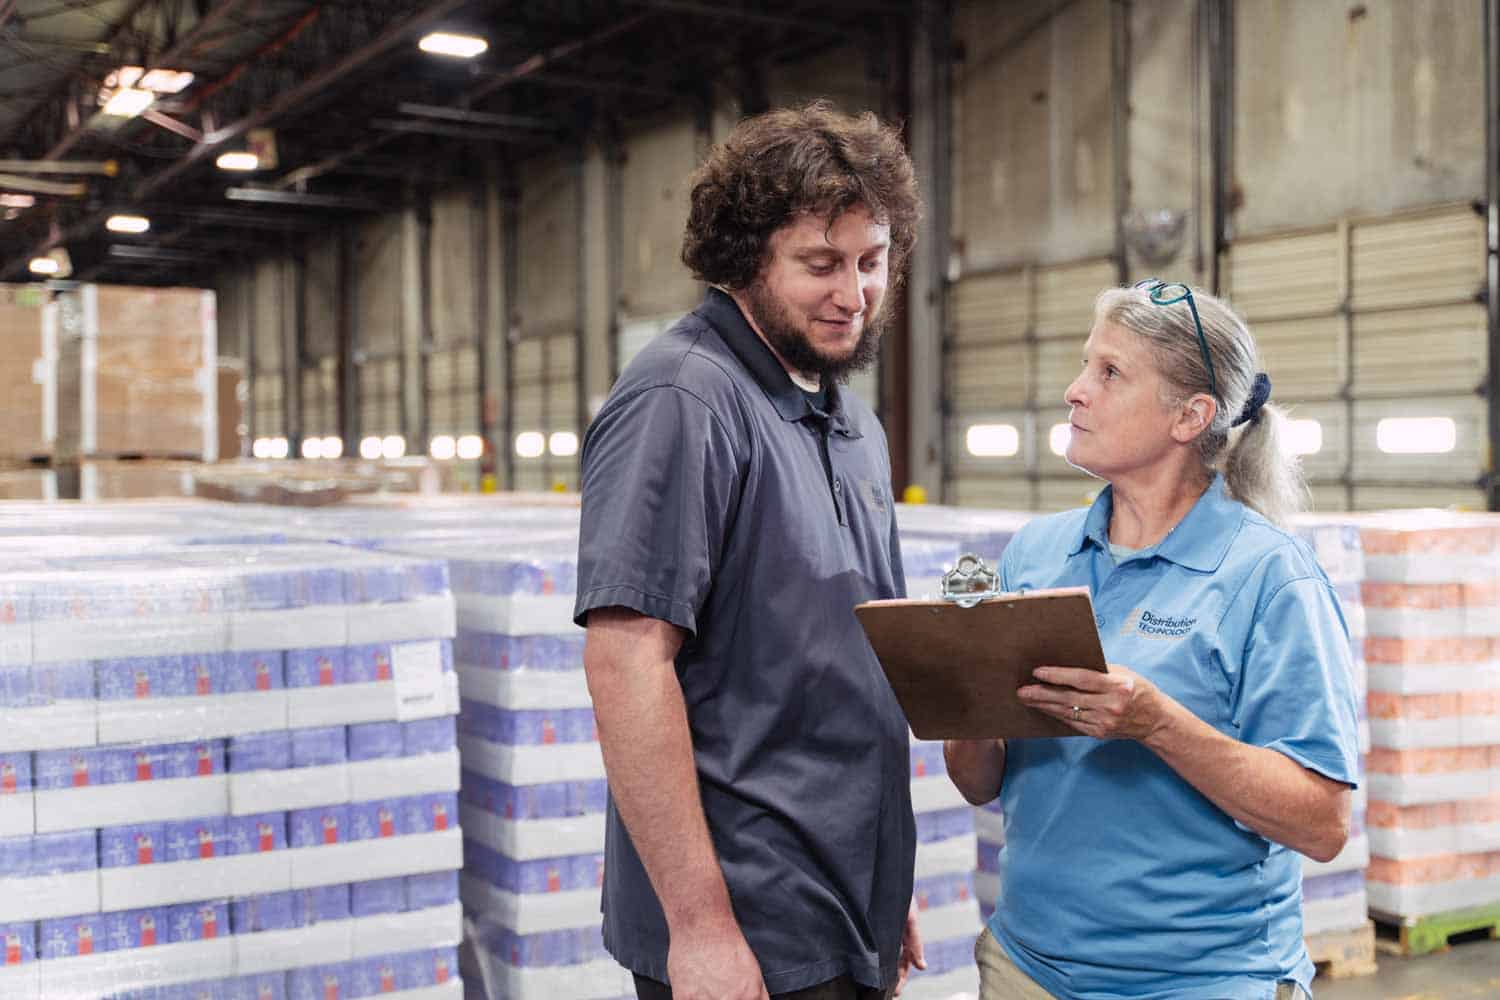 young man consulting with a supervisor (holding a clipboard) in a warehouse